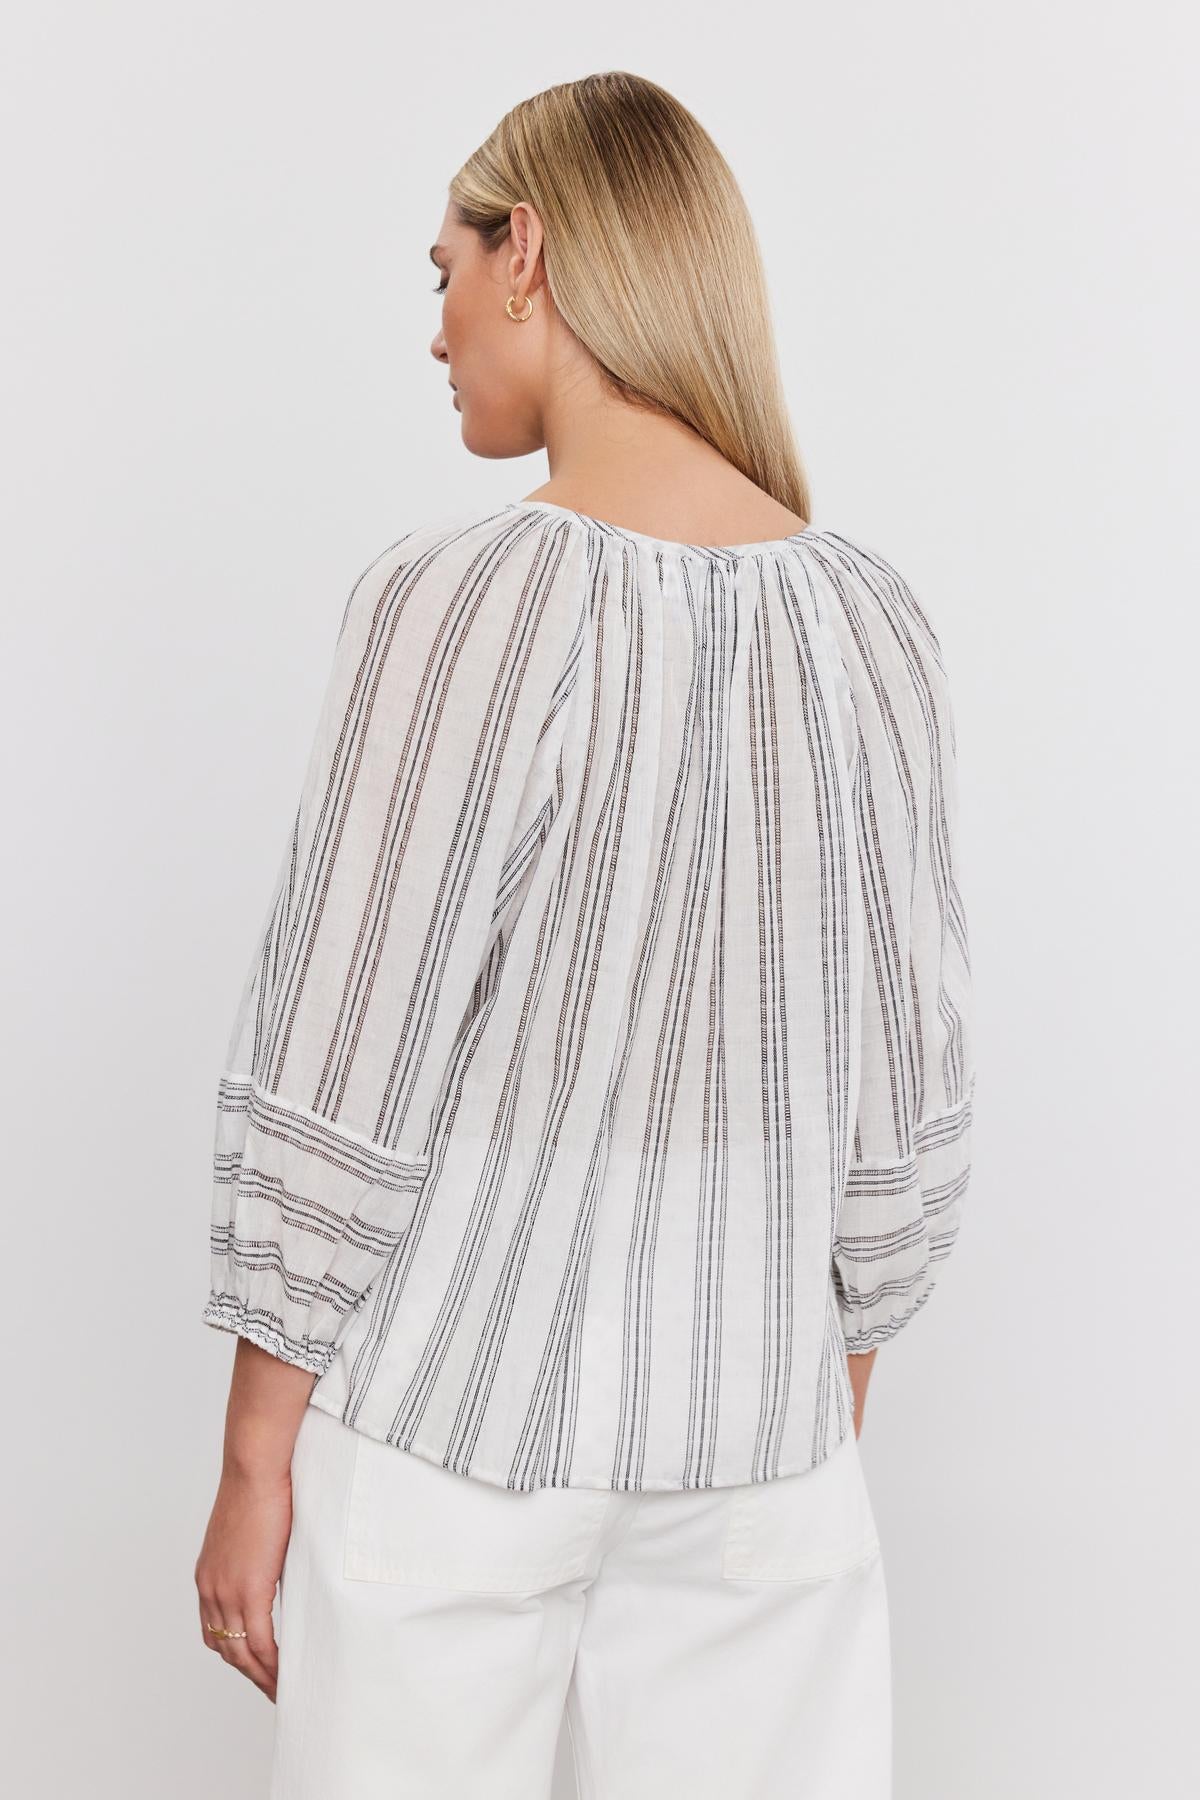 Woman from the back wearing a Gianna Top by Velvet by Graham & Spencer with gathered detailing and white, relaxed fit pants, standing against a plain background.-36910245970113